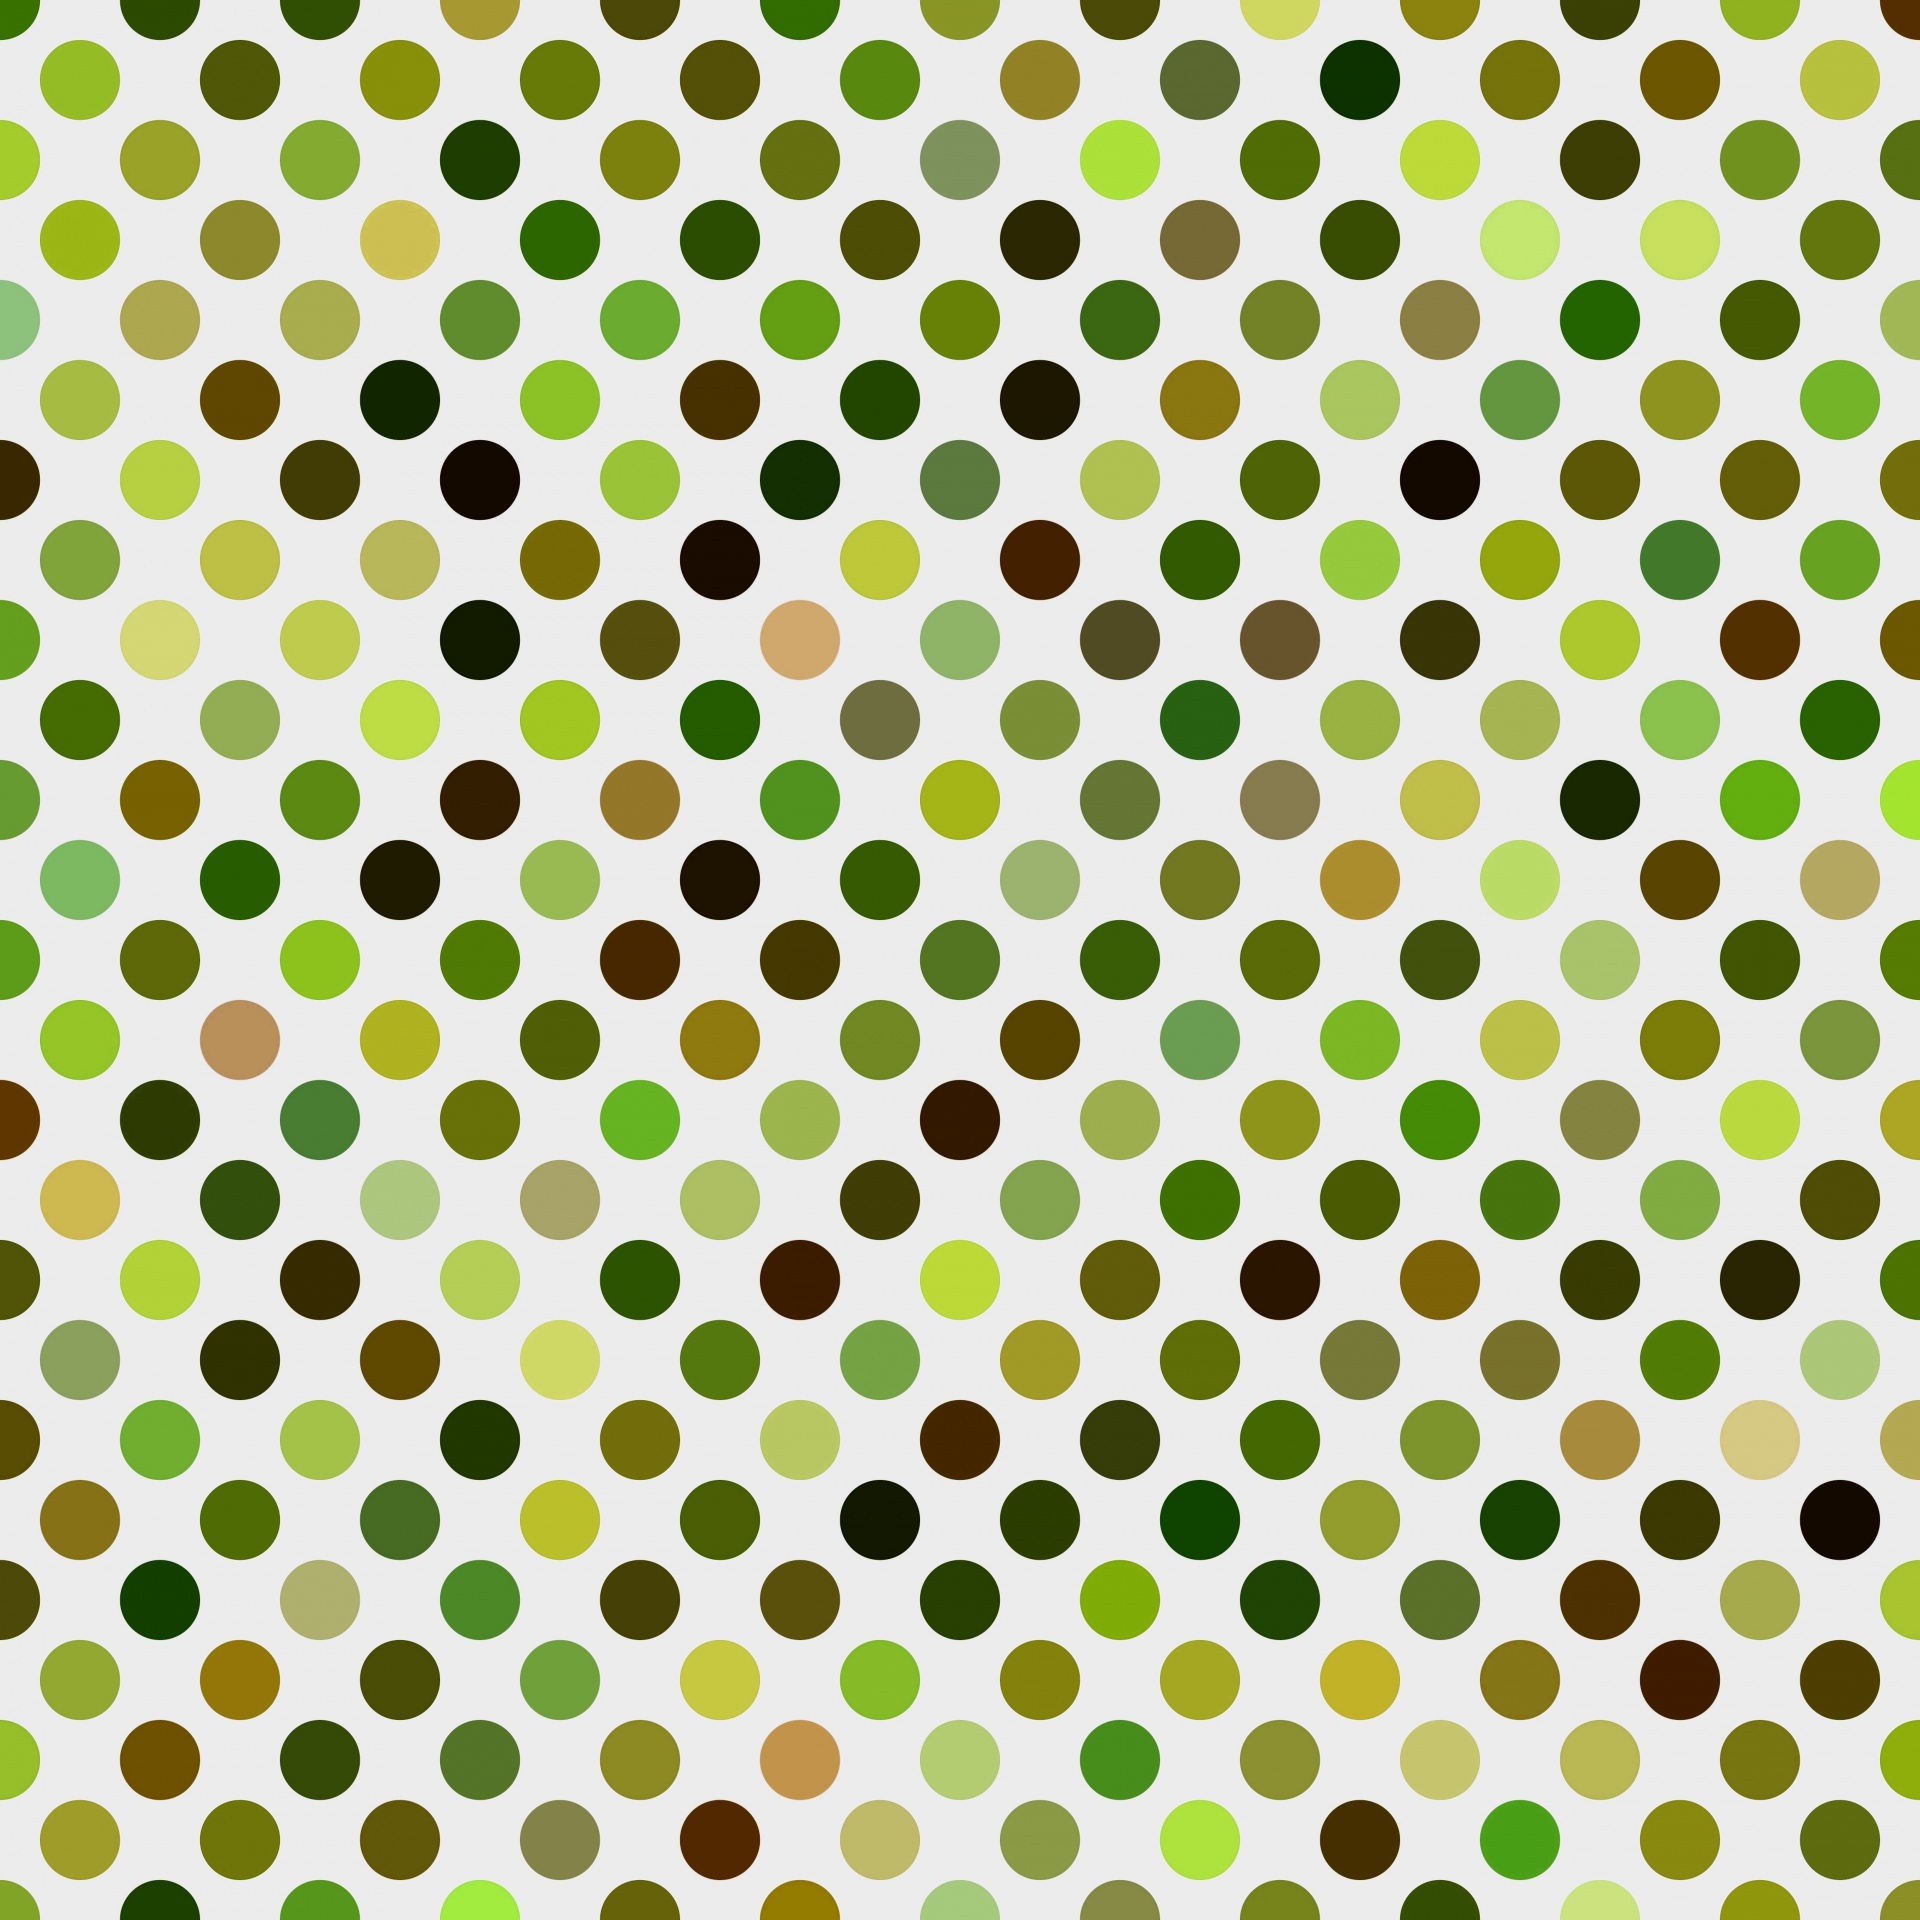 Dots Background Green White